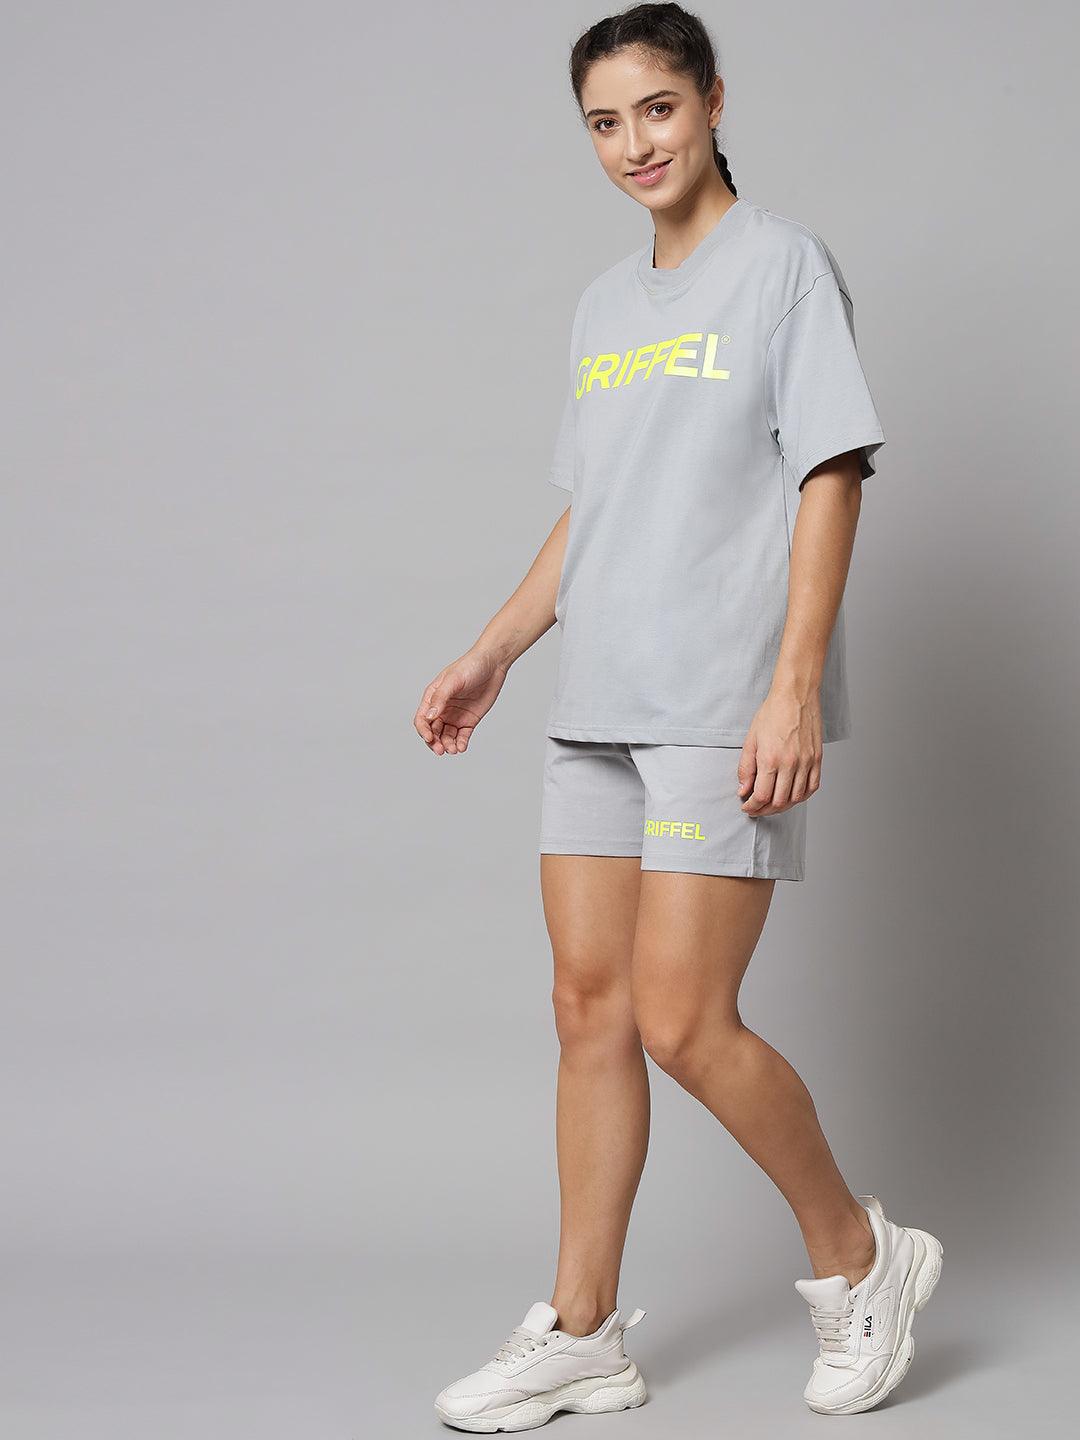 GRIFFEL Women Steel Grey Printed Oversized Loose fit T-shirt and Short Set - griffel